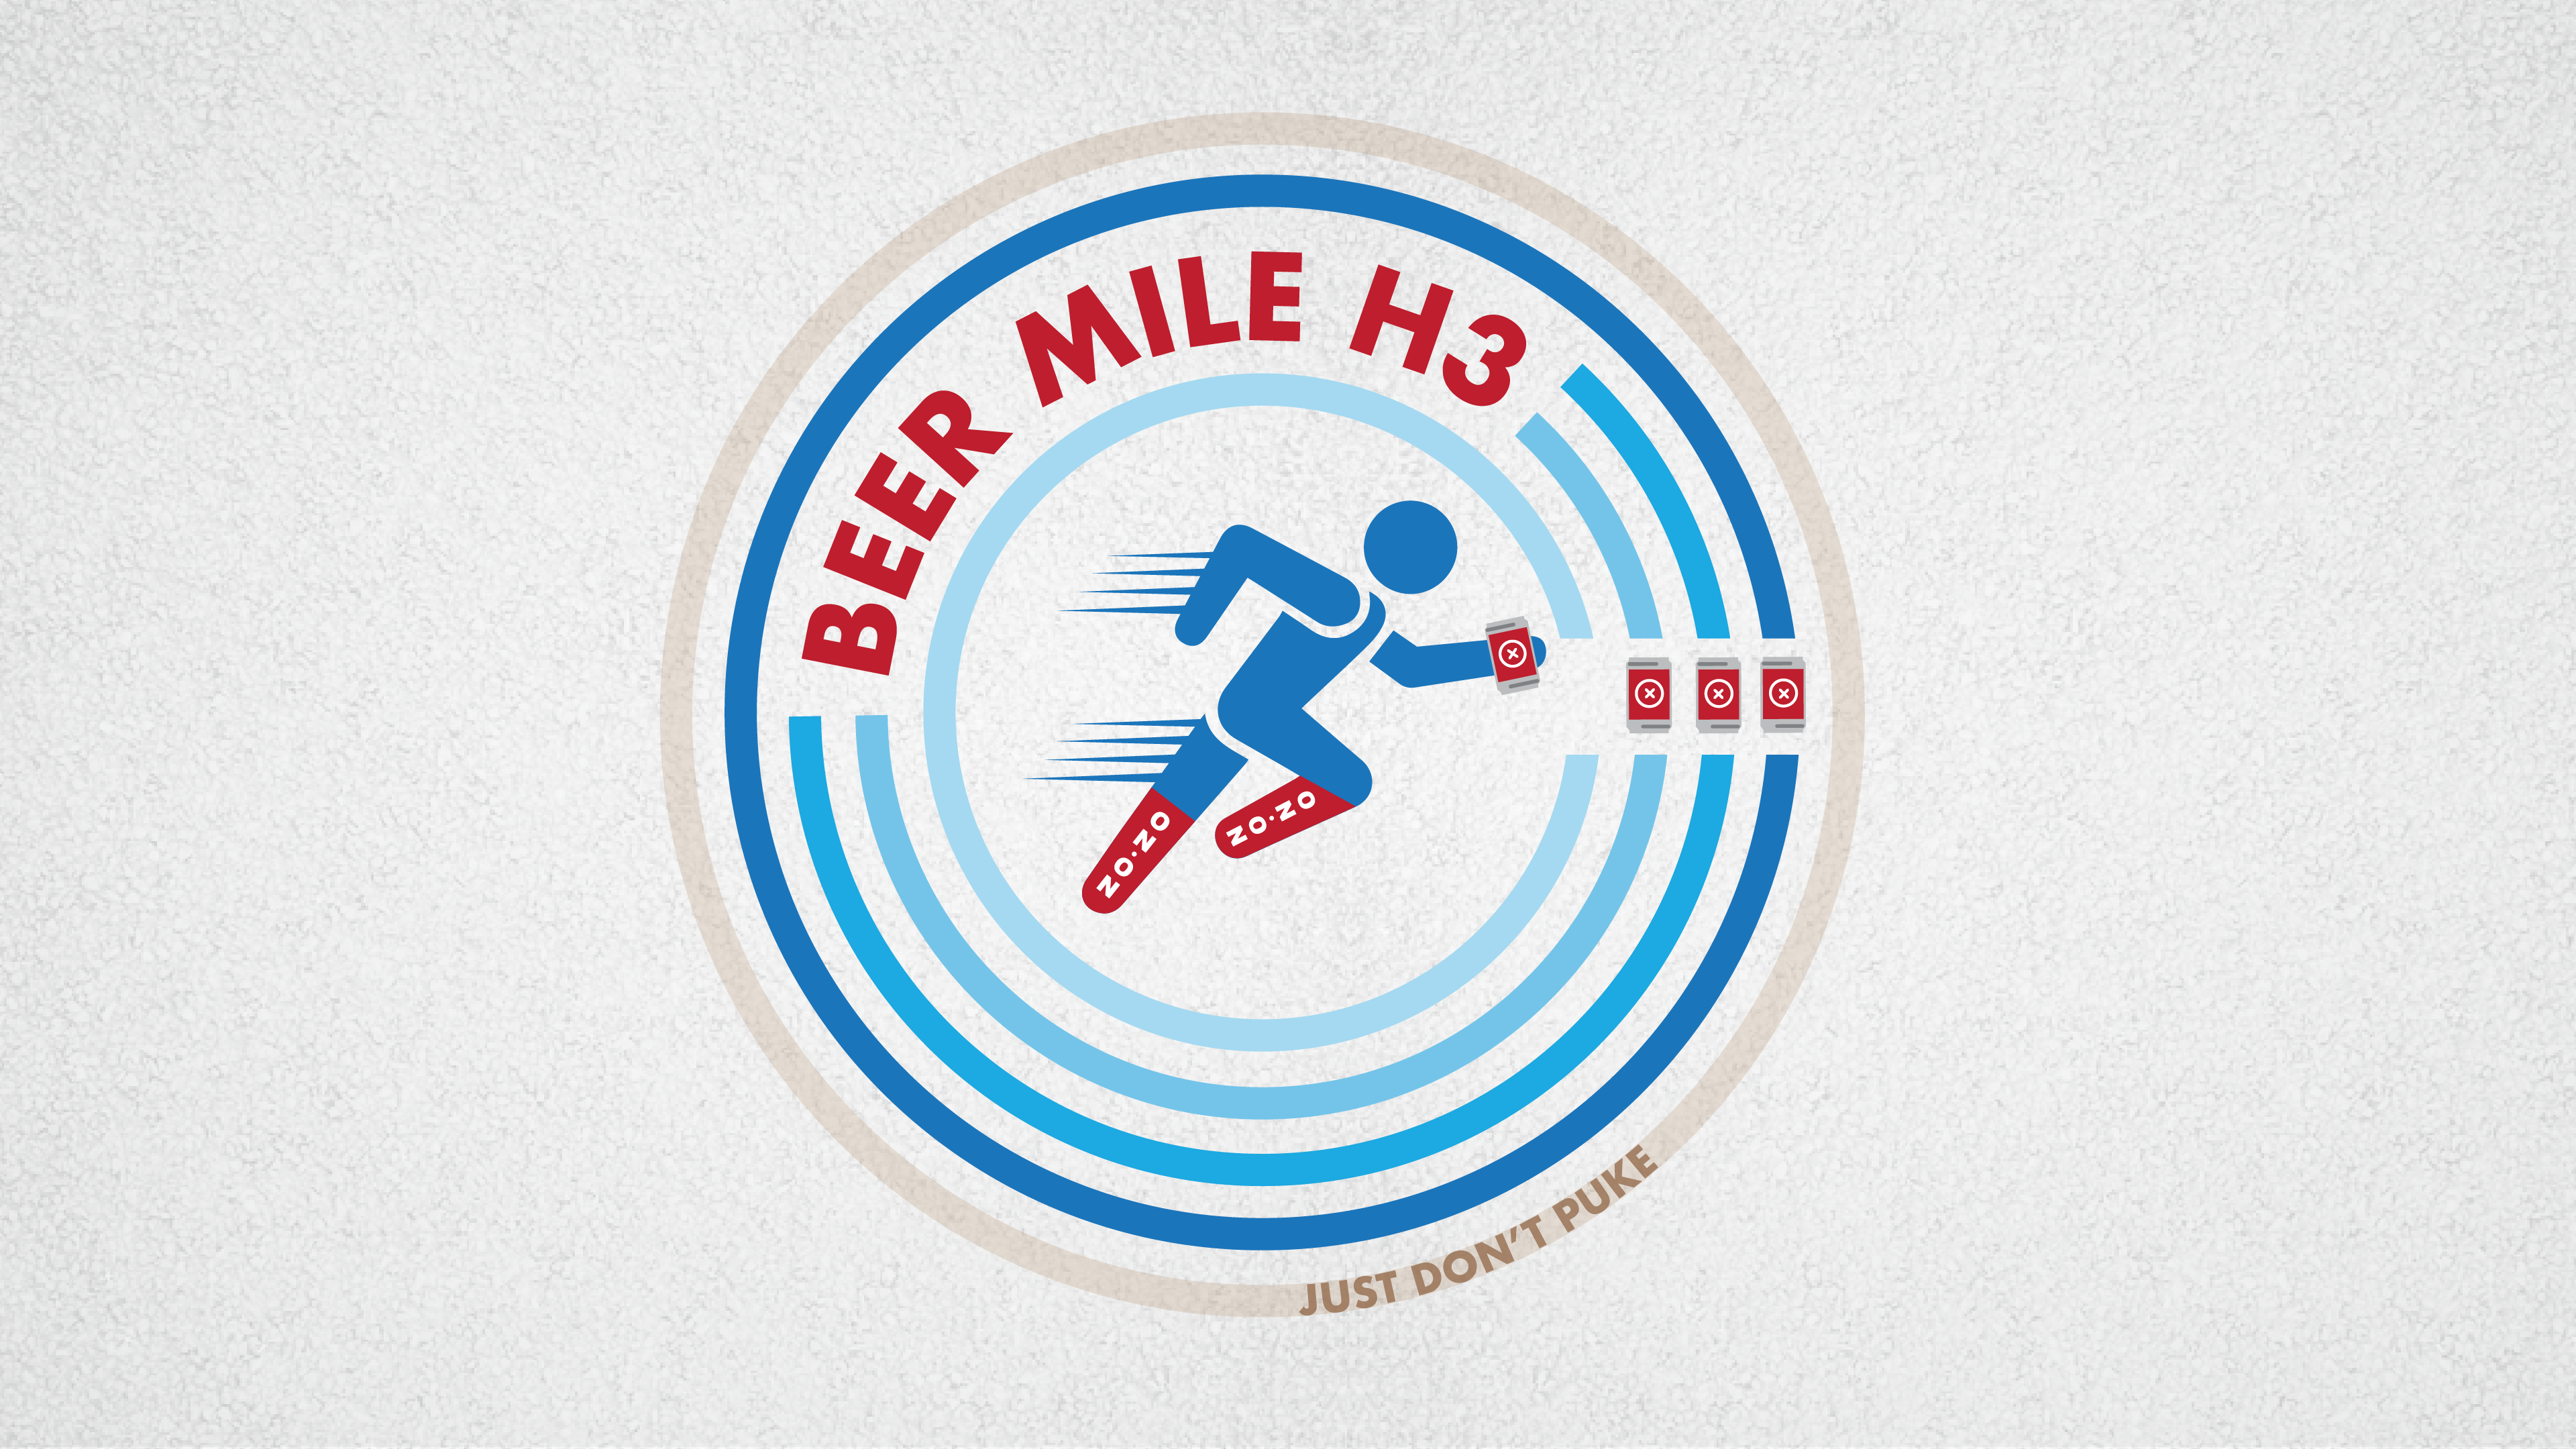 Beer Mile event logo feature image